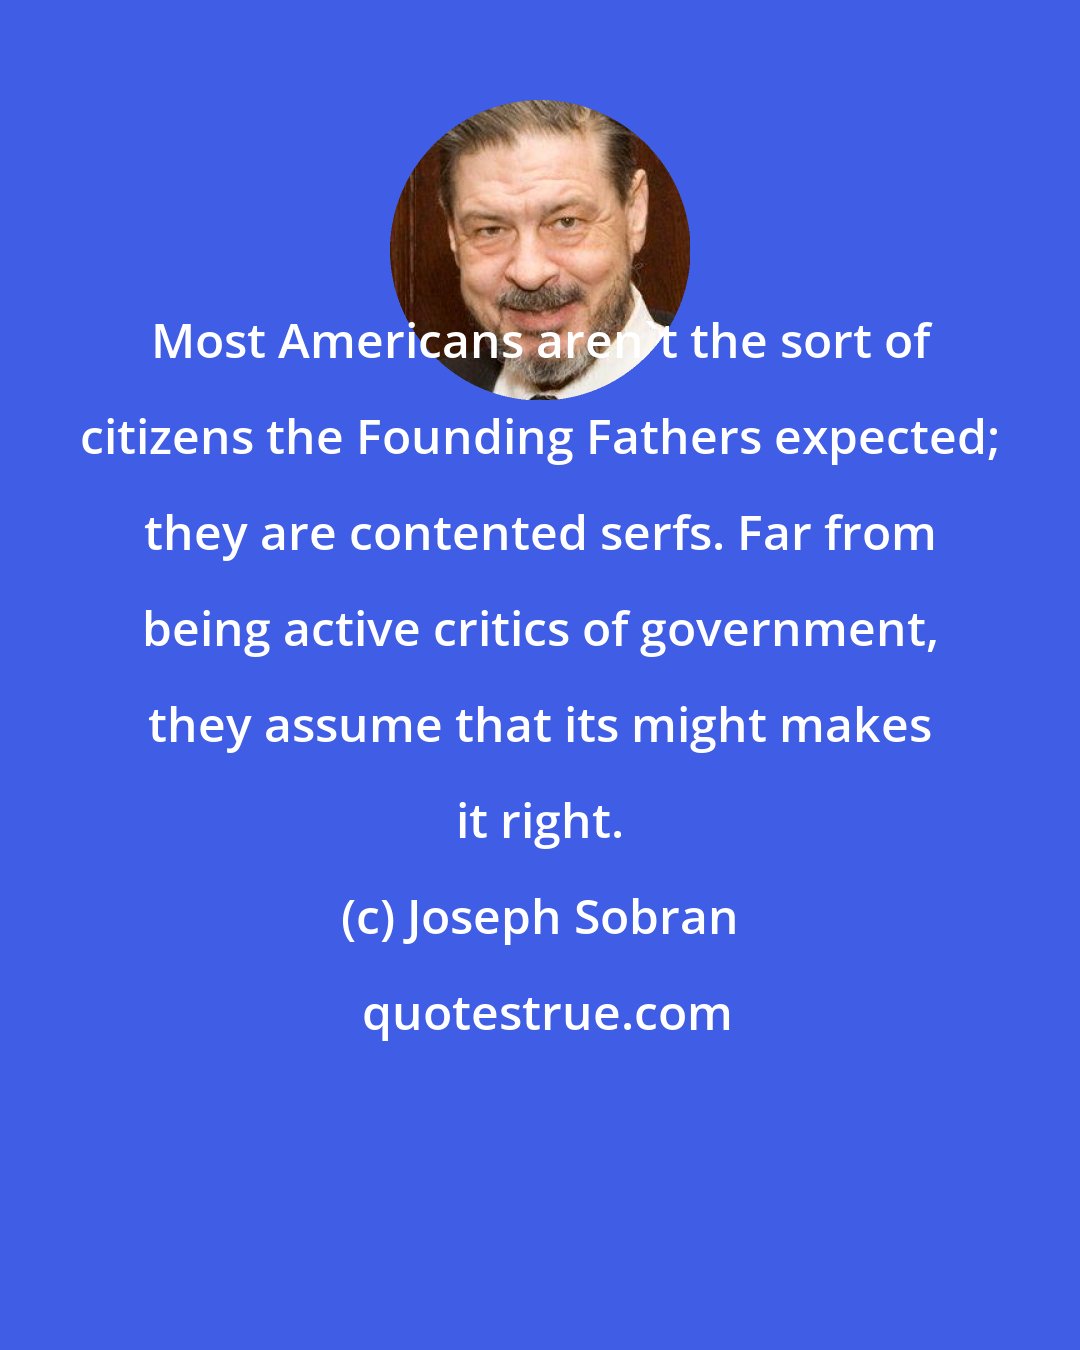 Joseph Sobran: Most Americans aren't the sort of citizens the Founding Fathers expected; they are contented serfs. Far from being active critics of government, they assume that its might makes it right.